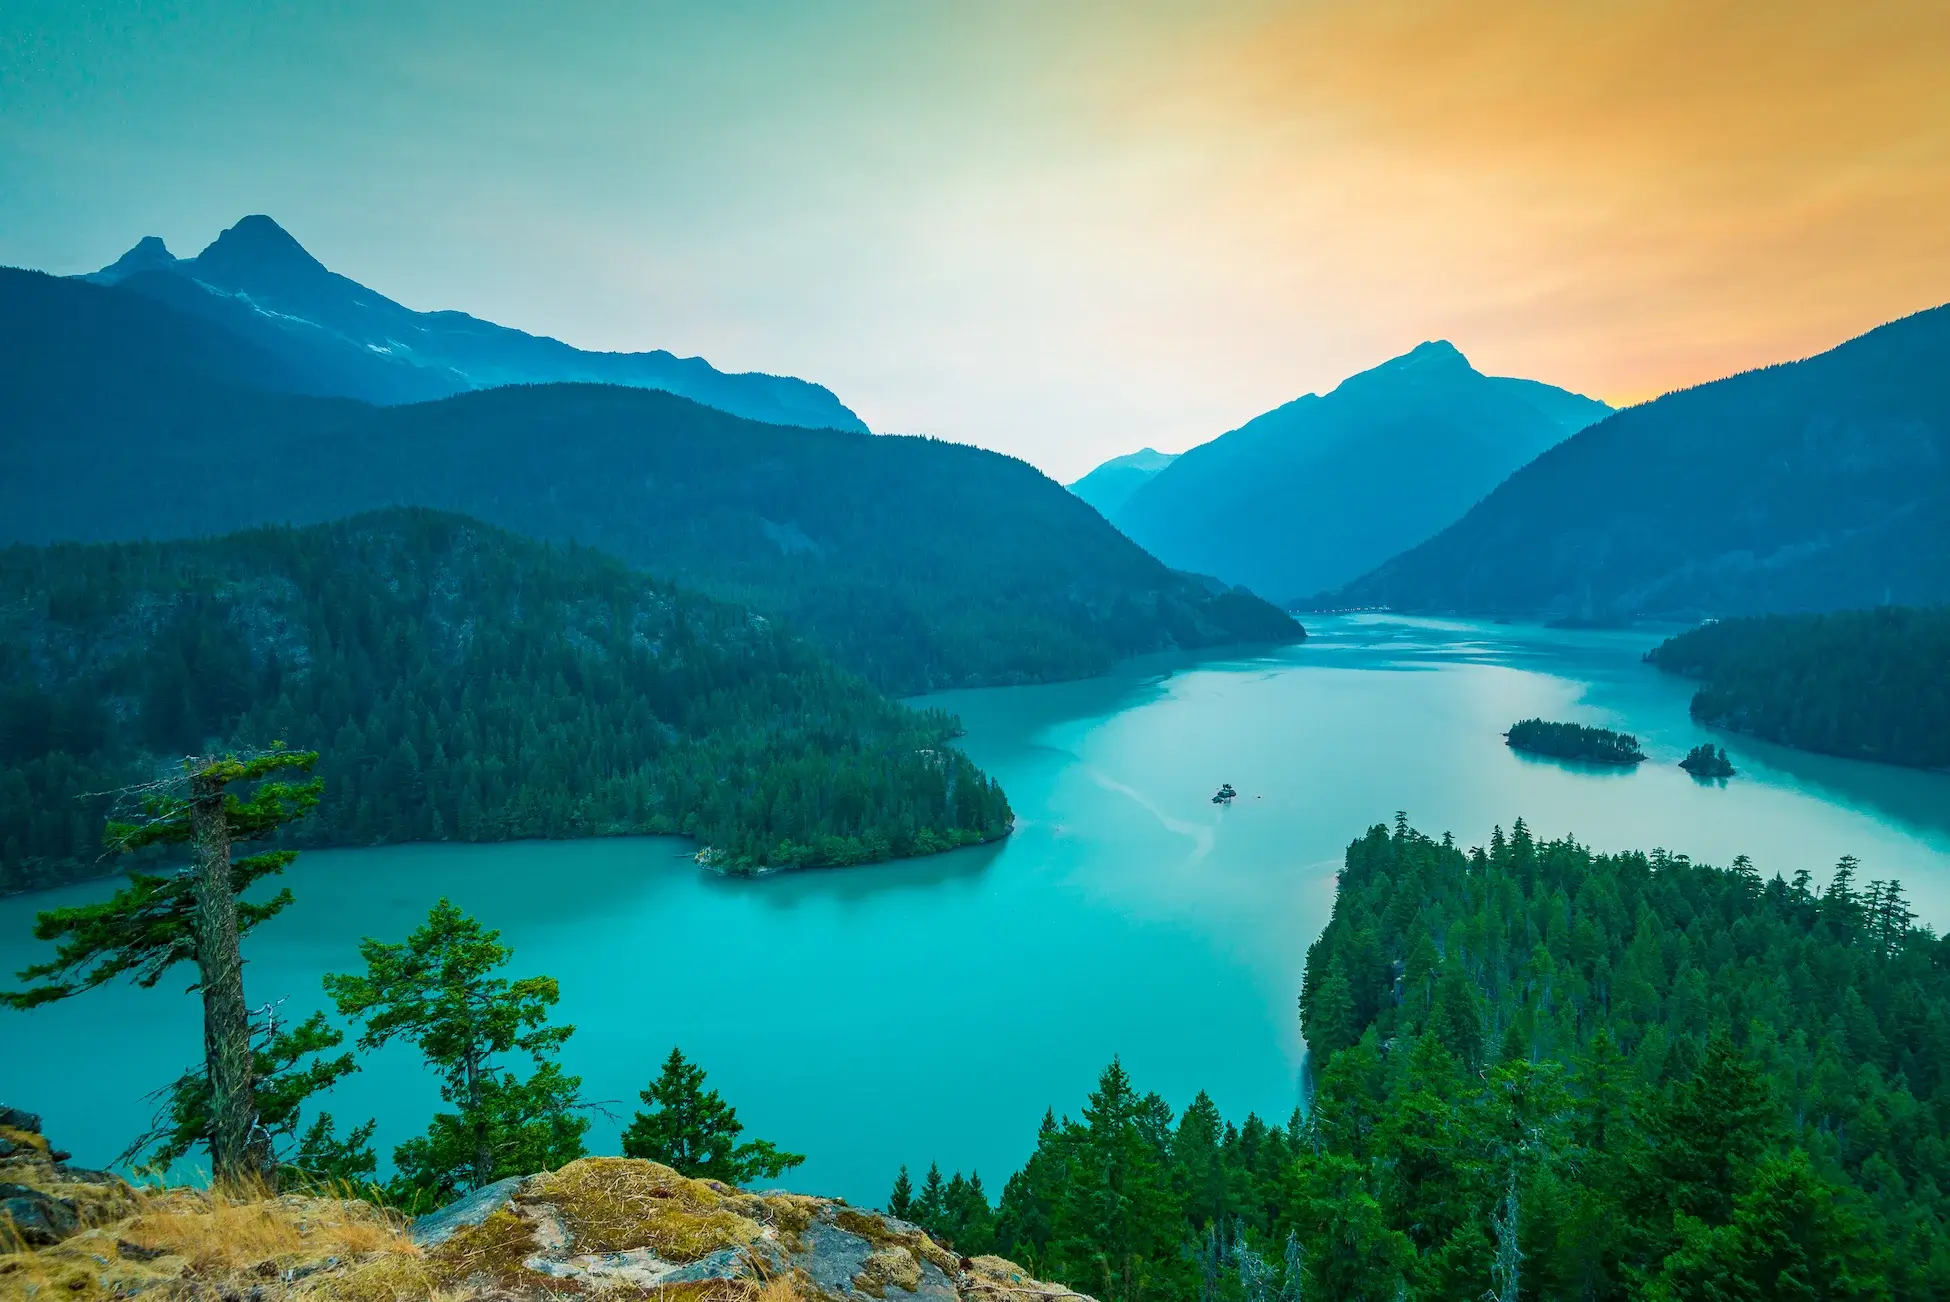 Diablo lake, sunset in North Cascades national park